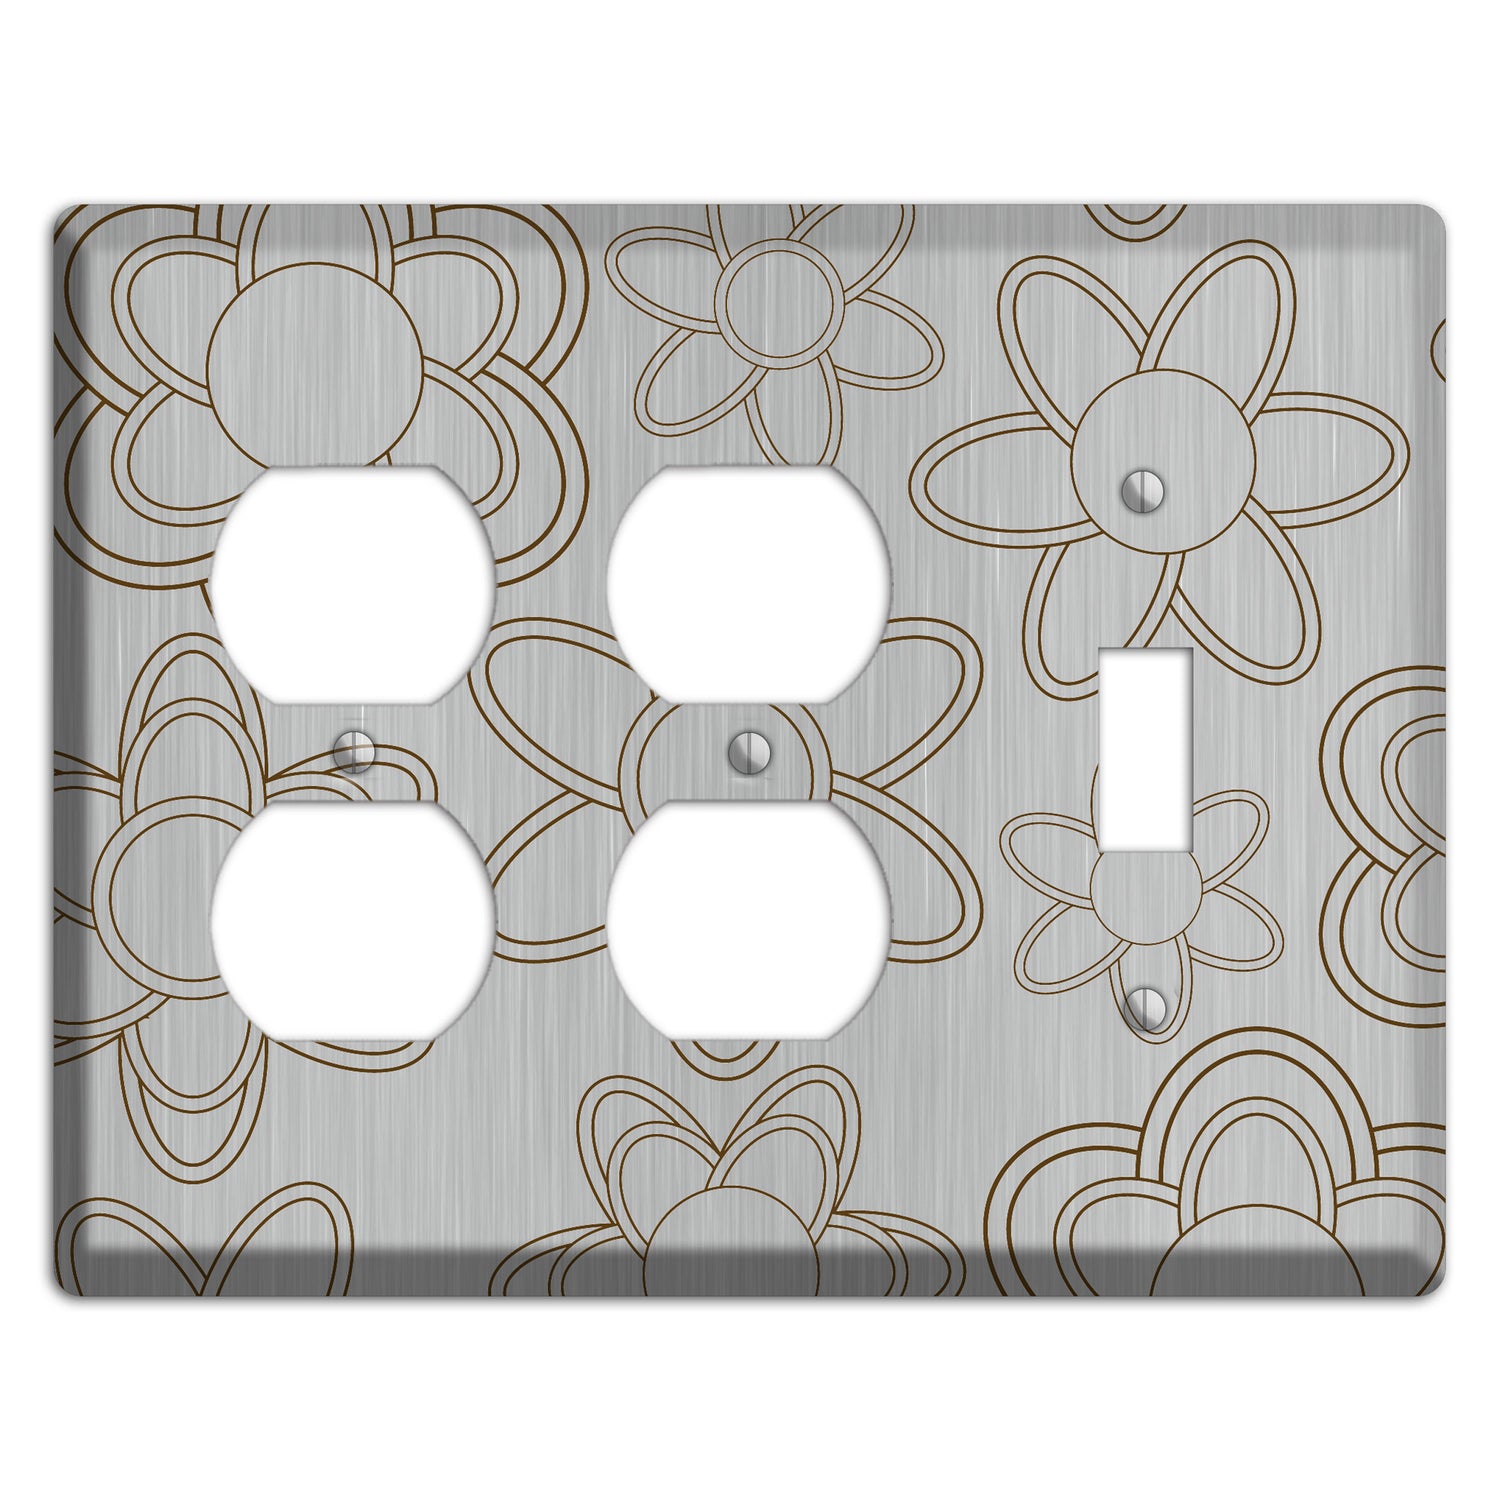 Retro Floral Contour  Stainless 2 Duplex / Toggle Wallplate